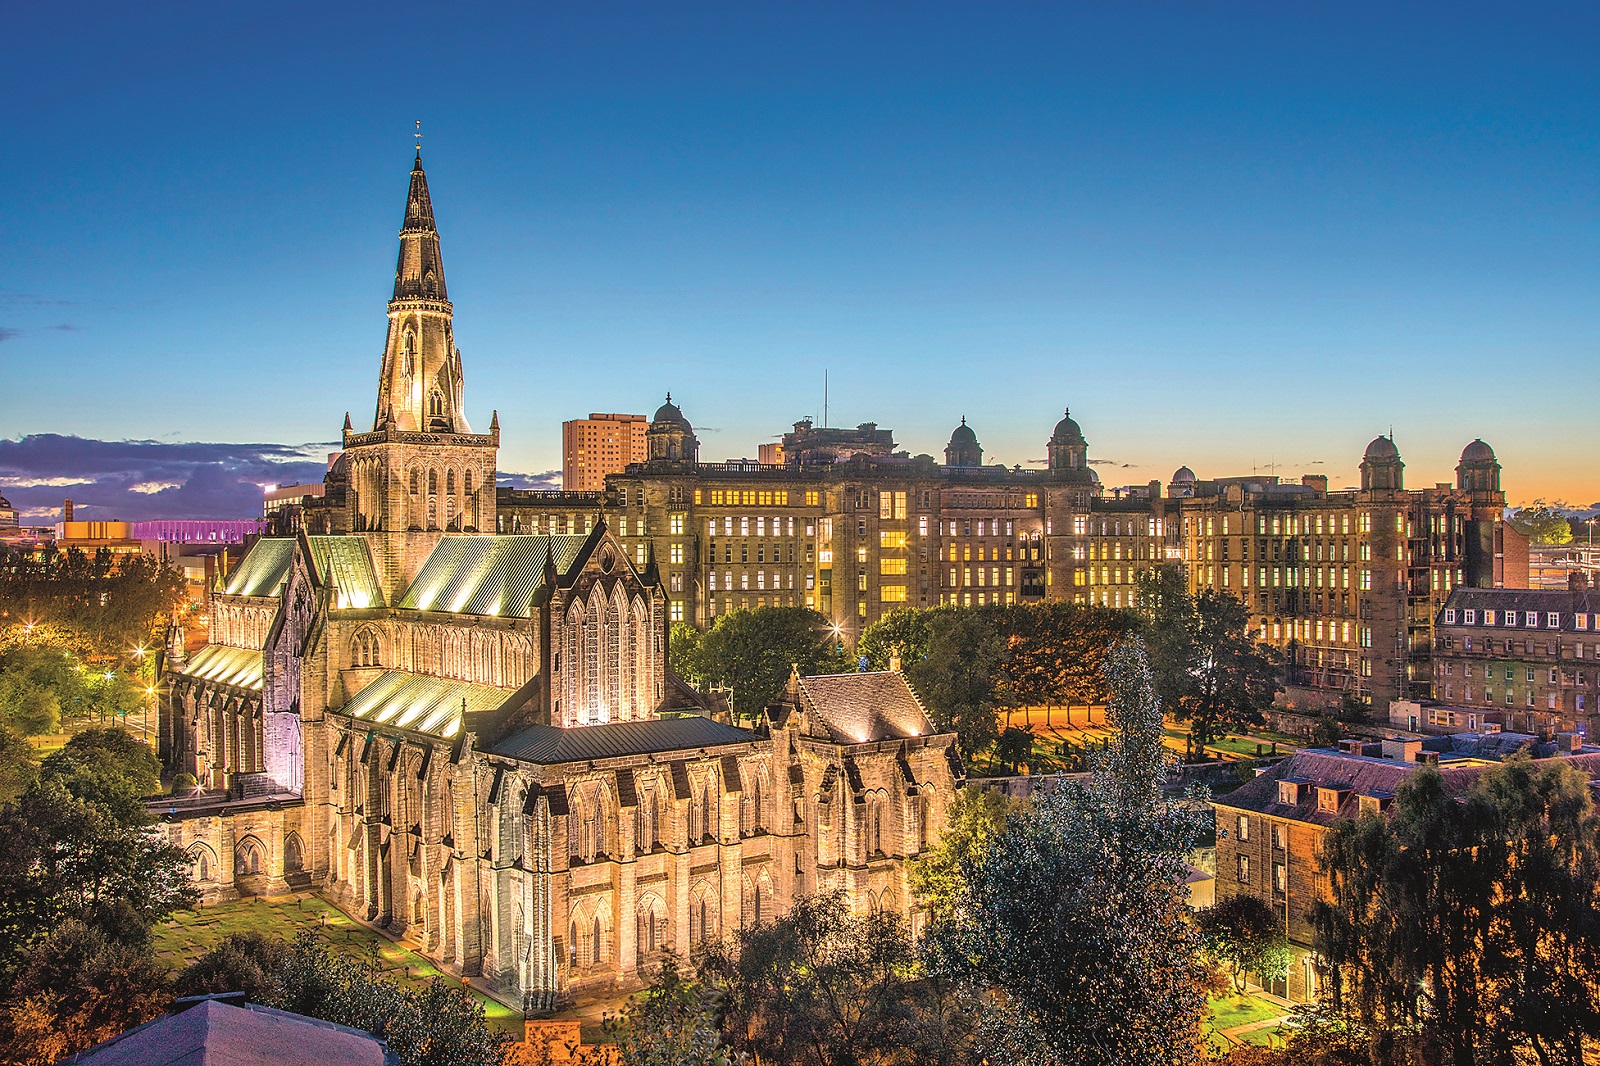 Glasgow Cathedral and Royal Infirmary at dusk, Glasgow, Scotland, United Kingdom, Europe,Image: 401673420, License: Rights-managed, Restrictions: , Model Release: no